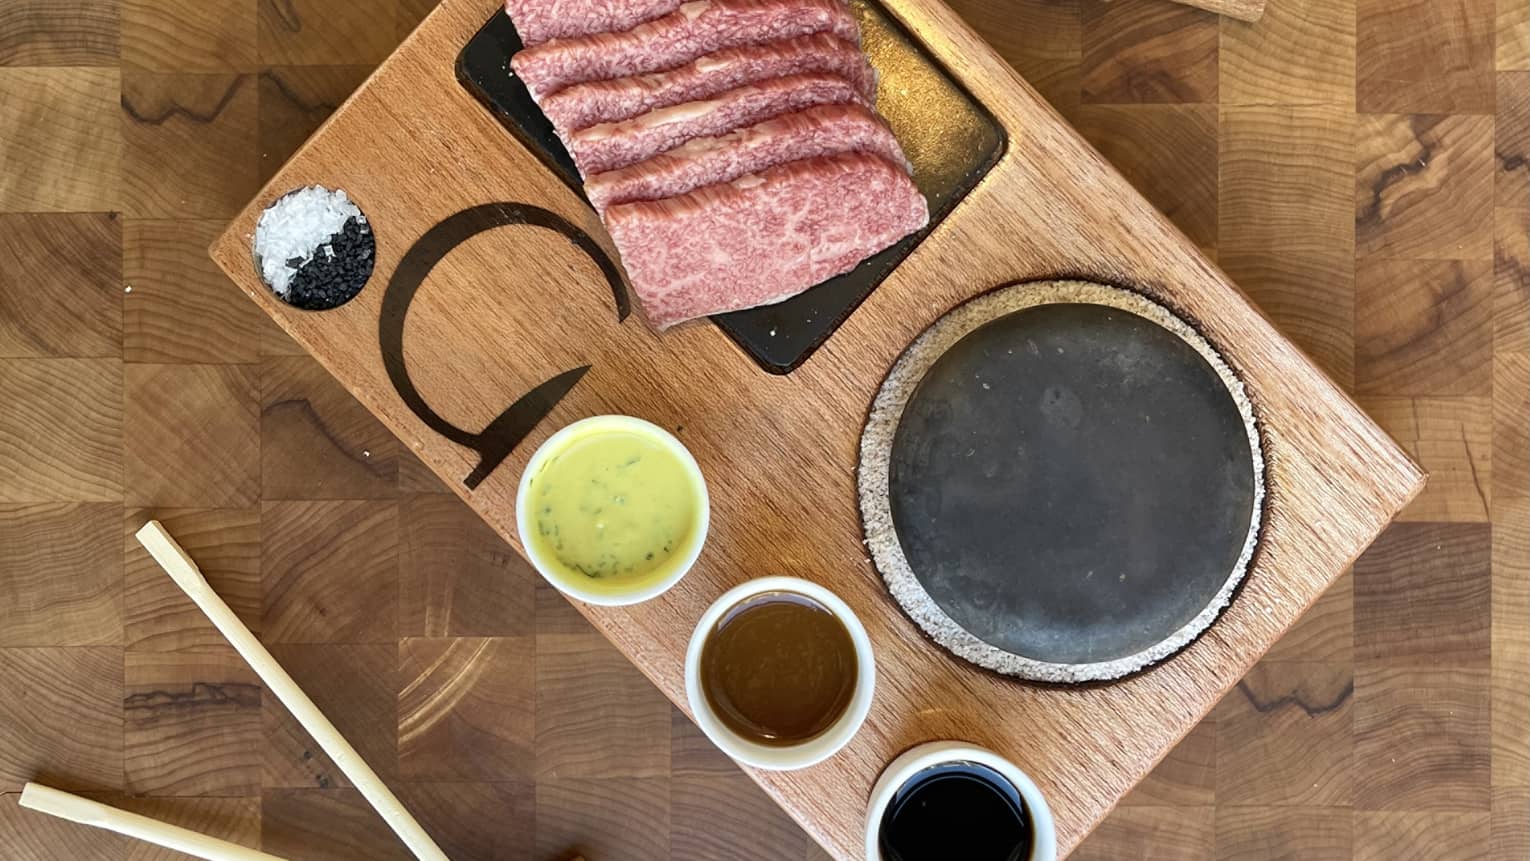 Wagyu steak and sauces on a wooden tray.